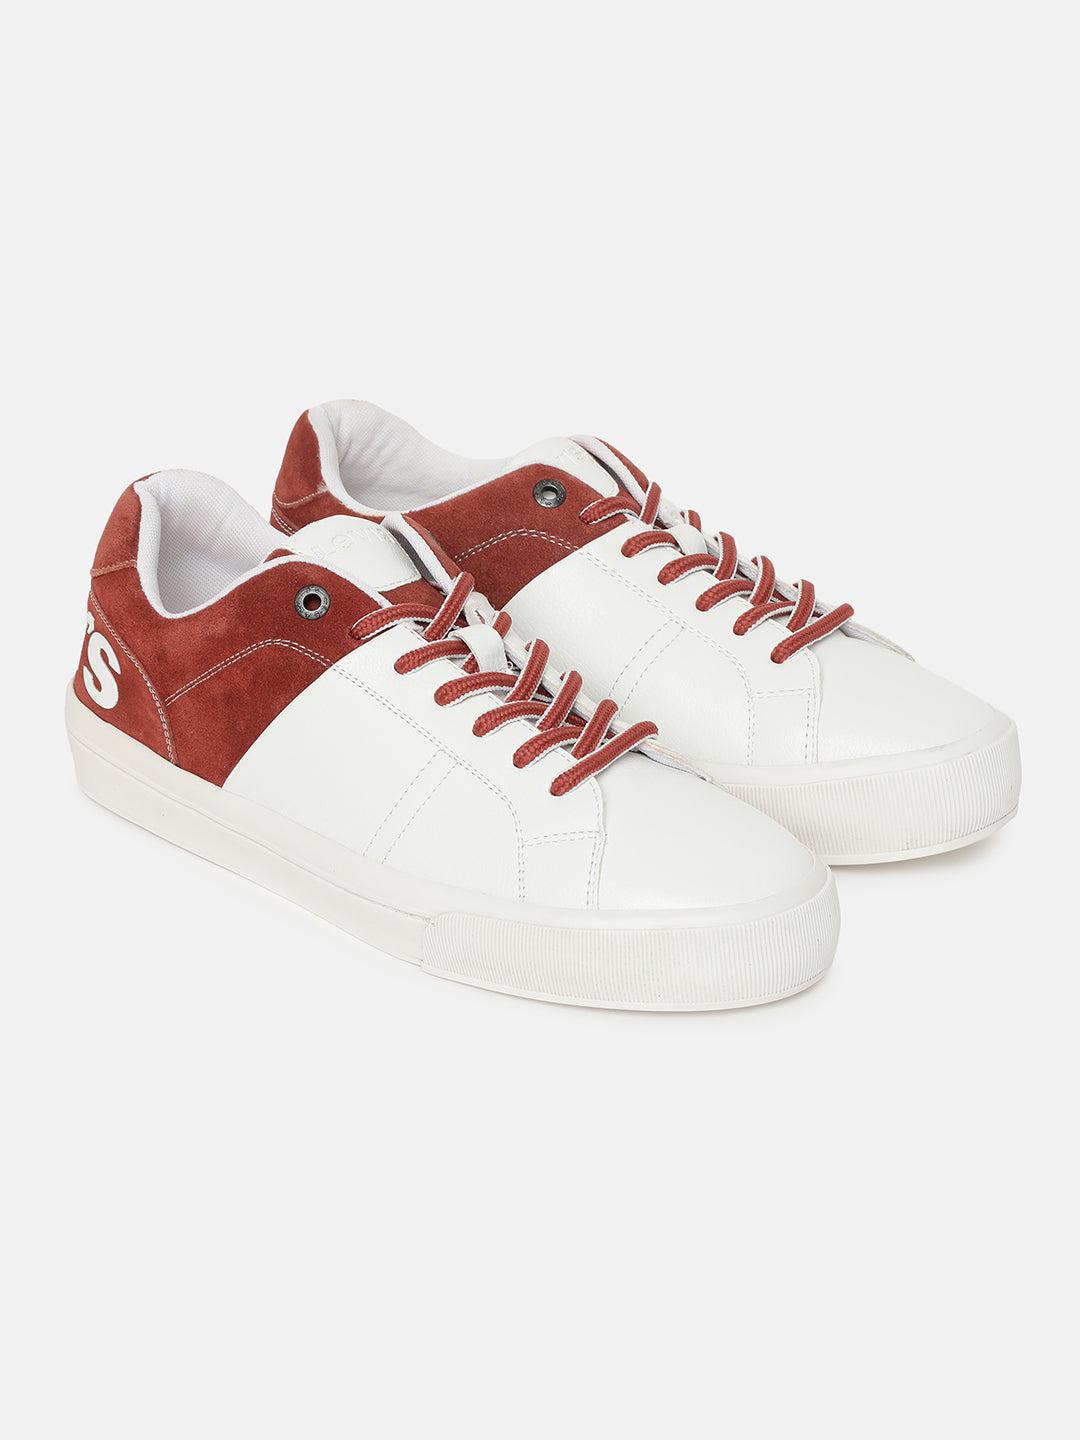 men's white and red colorblock sneakers